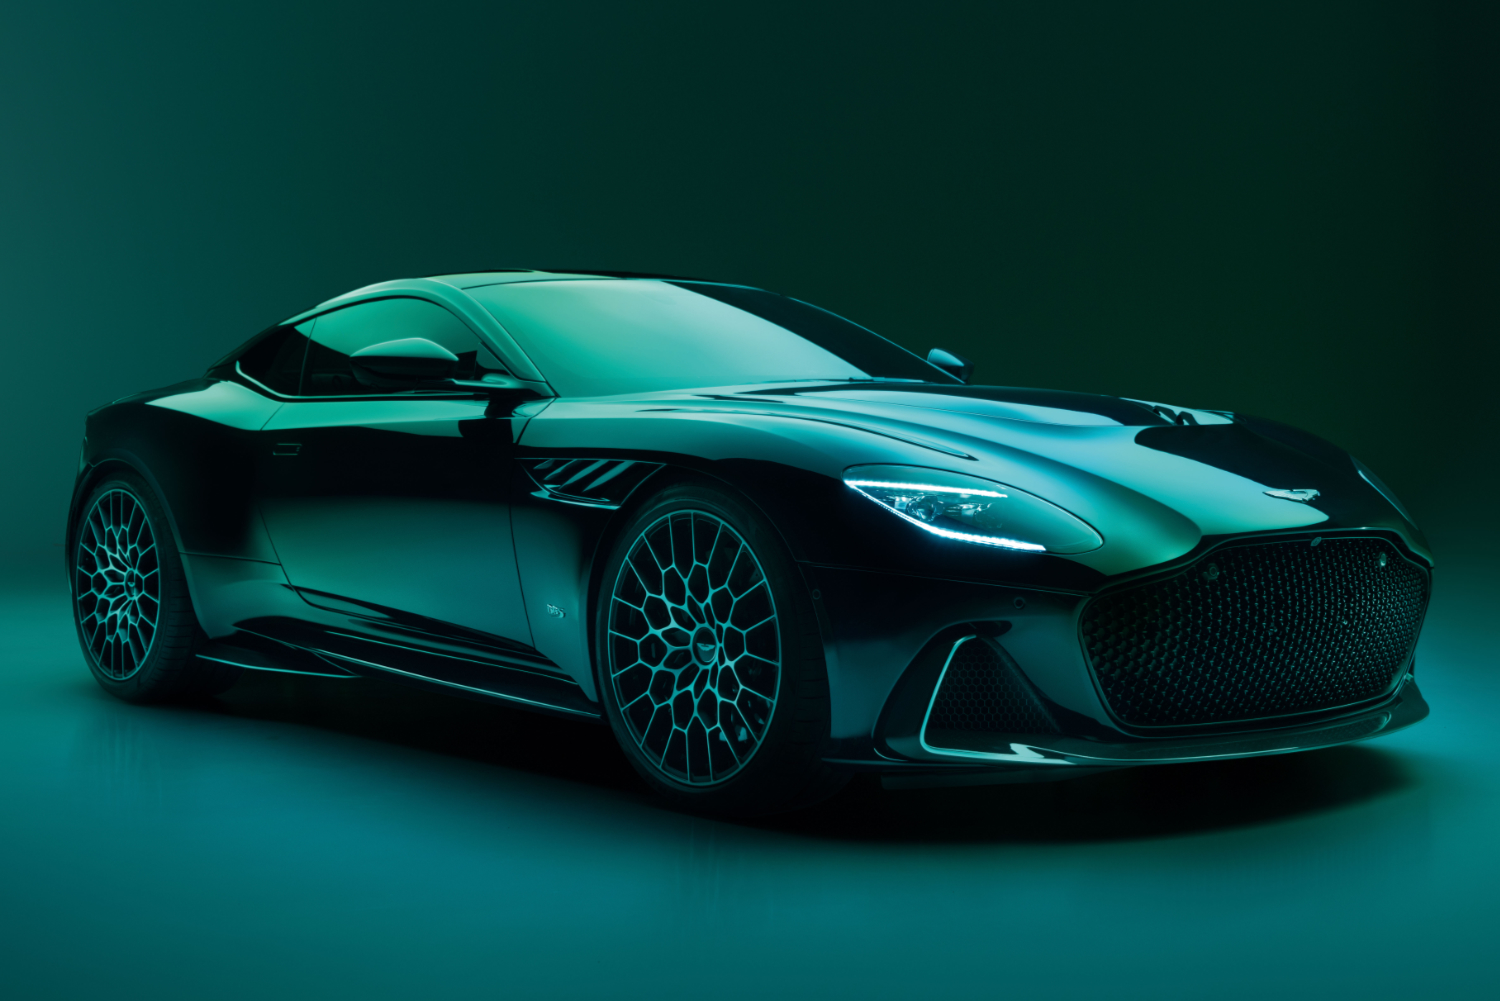 Aston Martin DBS goes out with a bang with new 770 Ultimate. Image by Aston Martin.